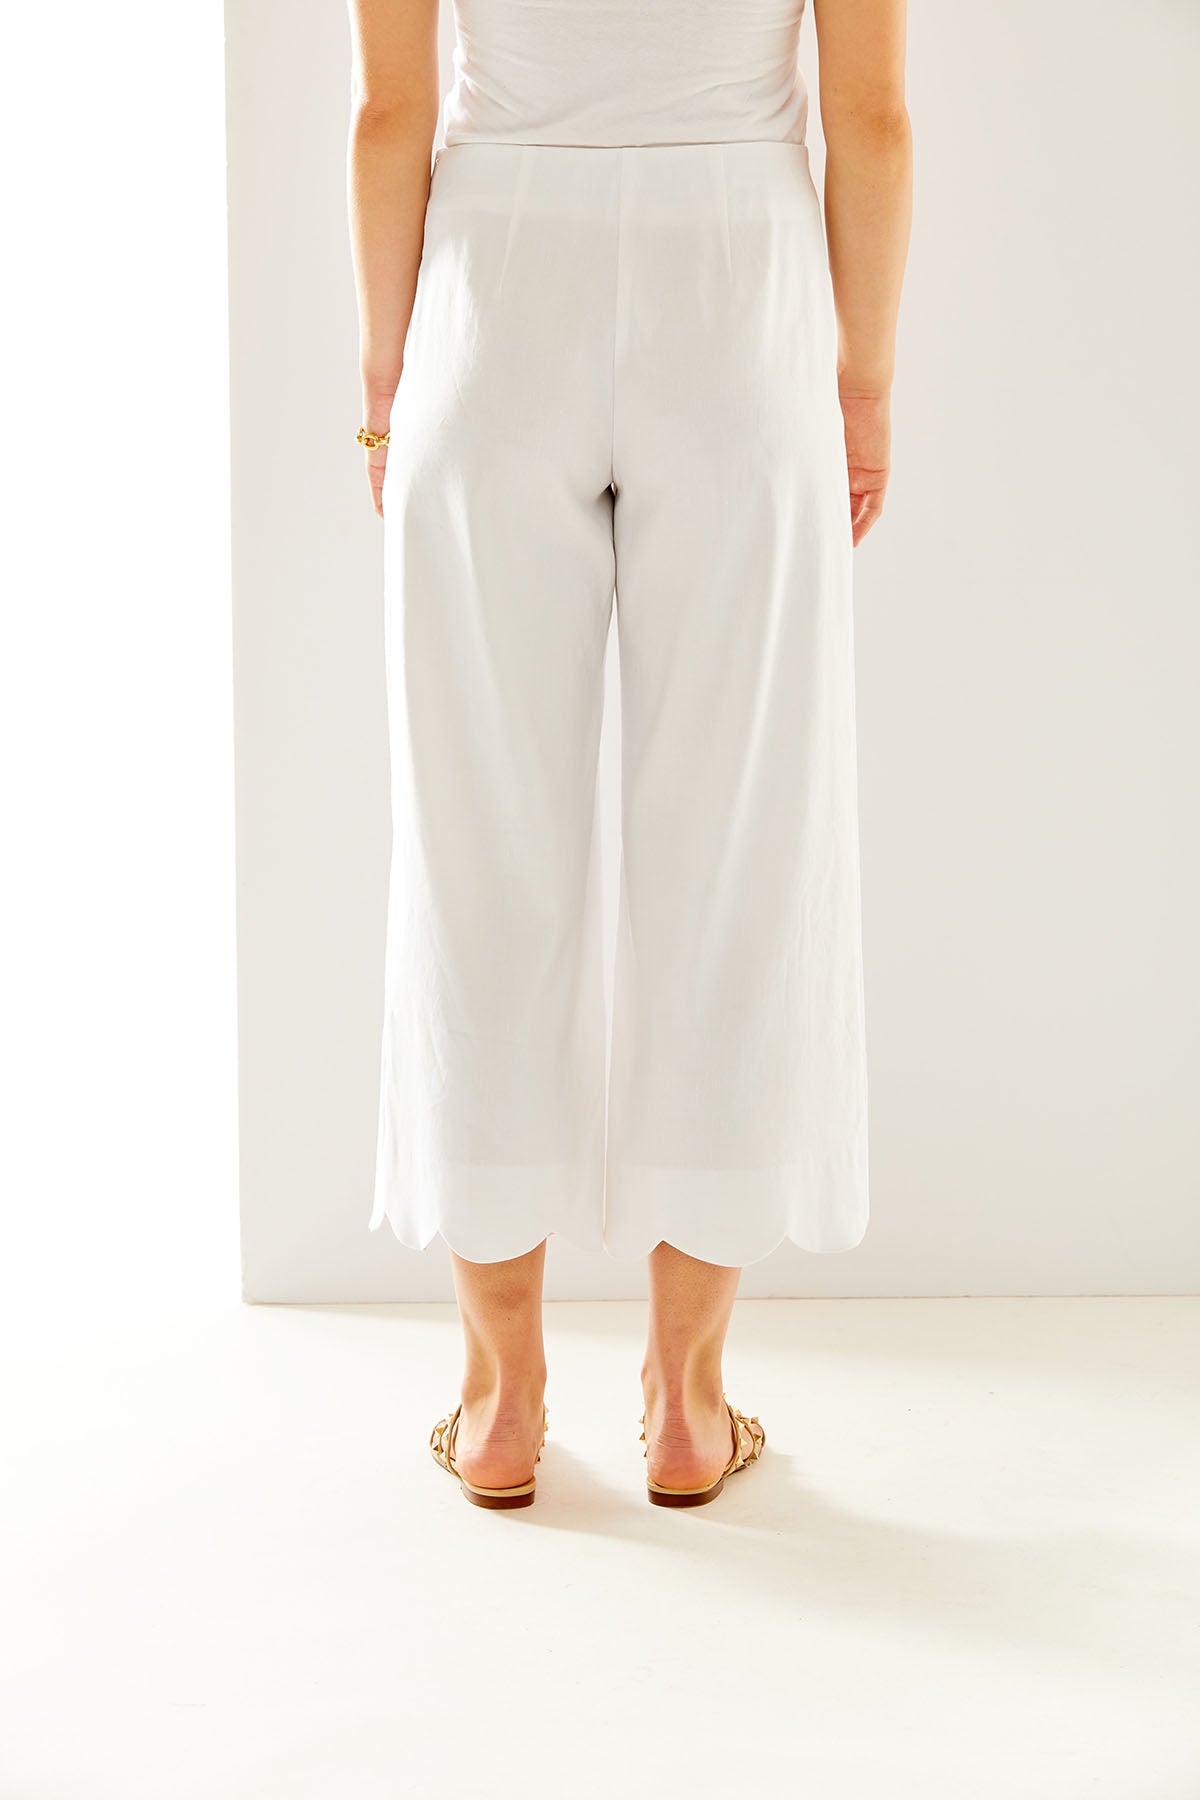 Woman in white pant with scallop hem